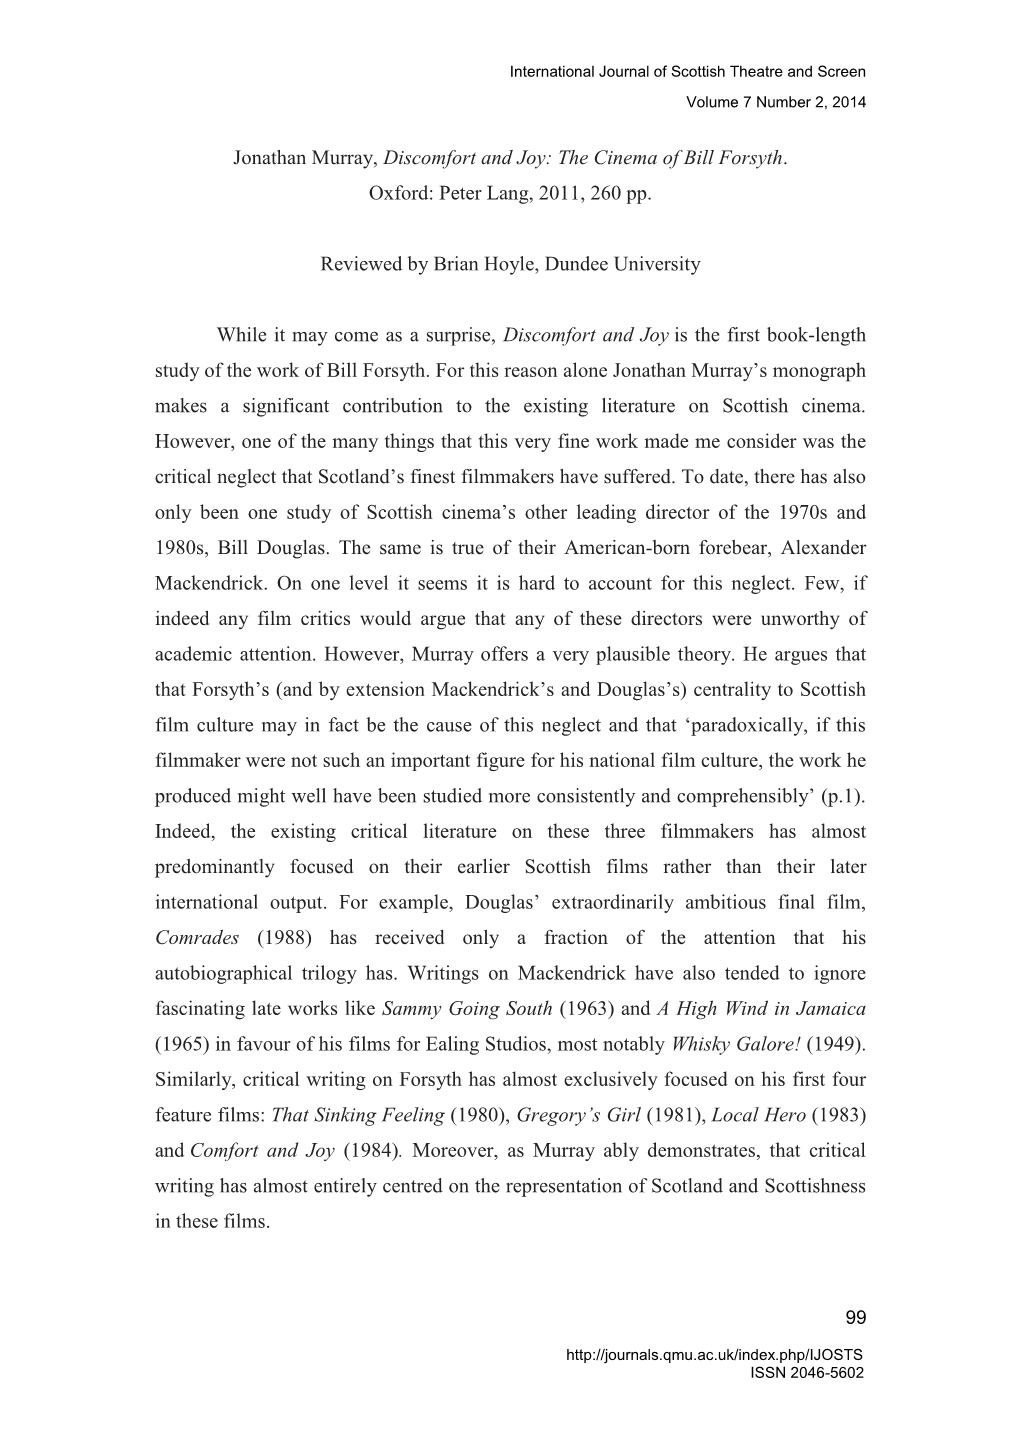 International Journal of Scottish Theatre and Screen Volume 7 Number 2, 2014